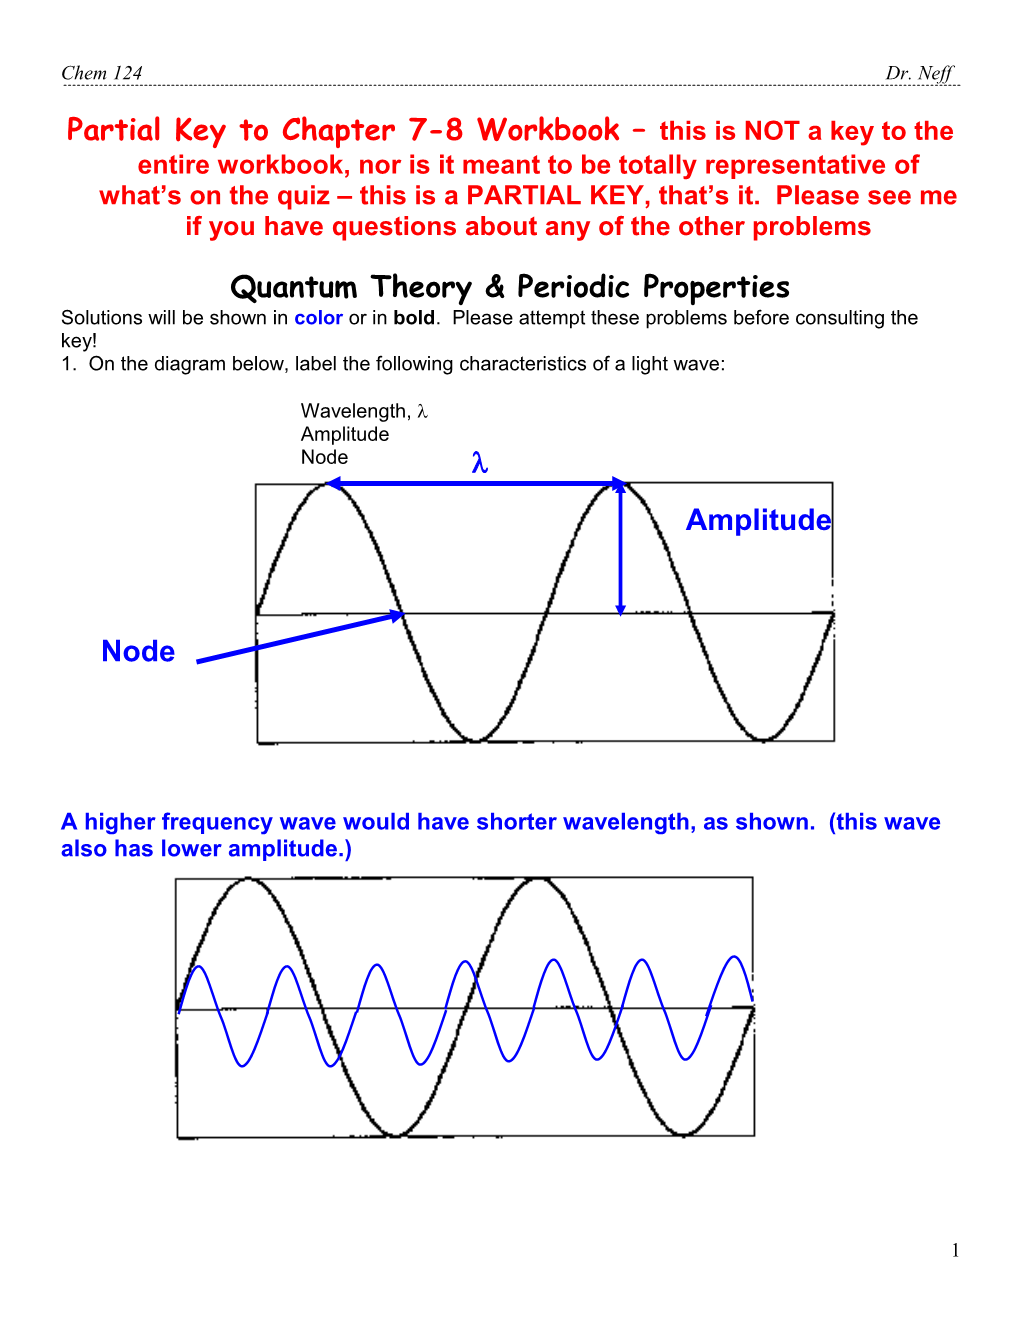 1. on the Diagram Below, Label the Following Characteristics of a Light Wave